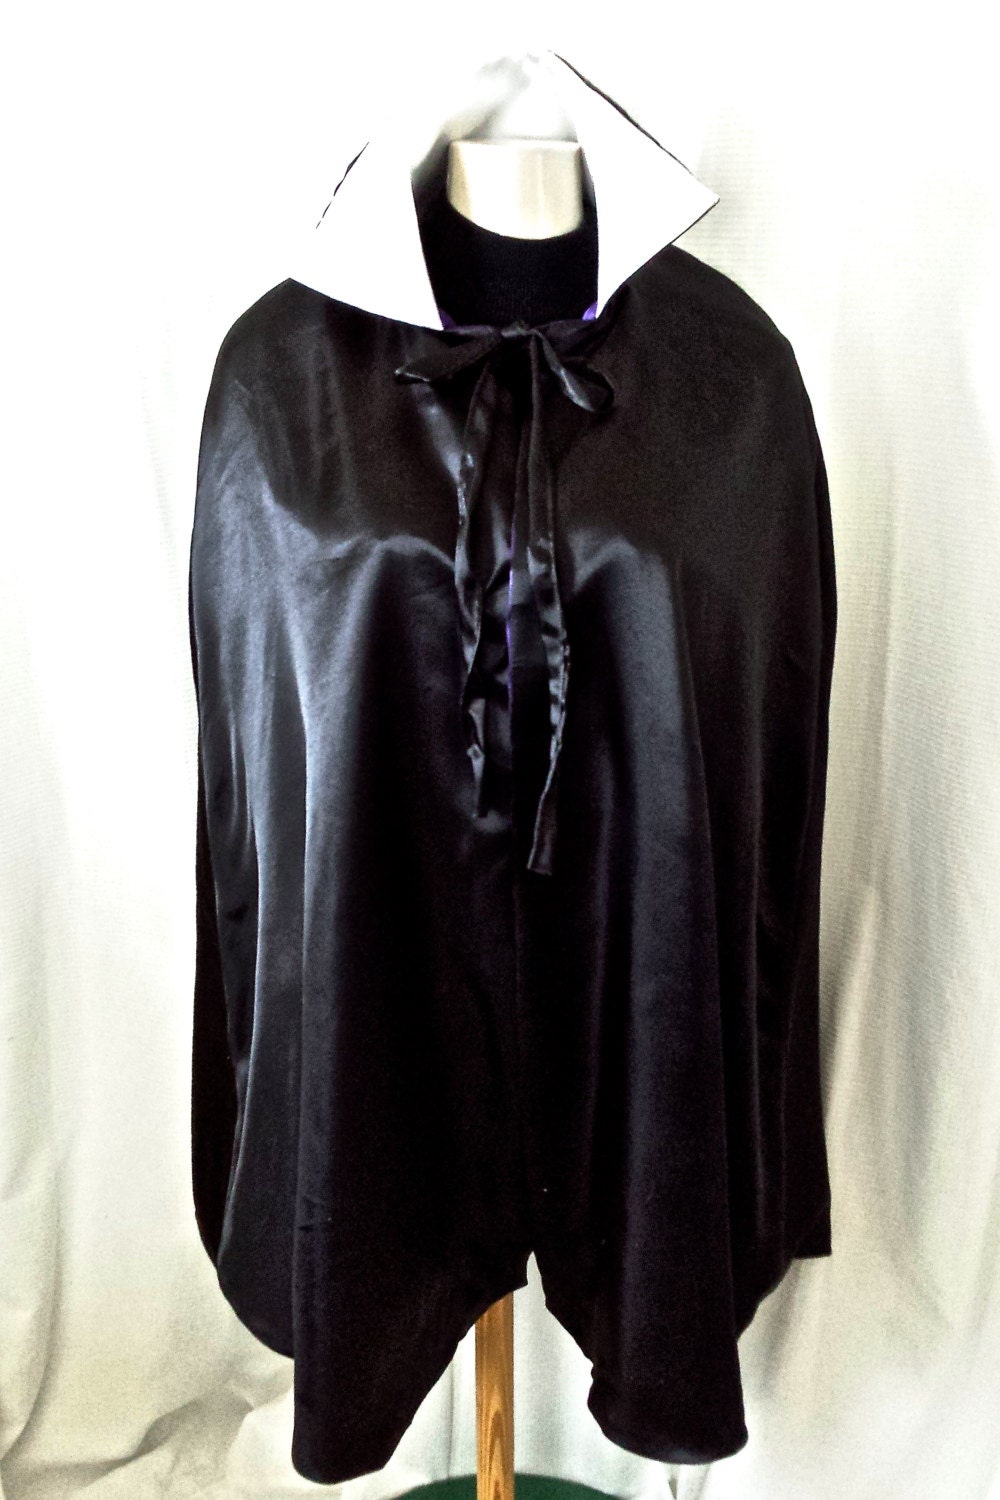 Evil Queen Royalty Cape Black satin with Purple by Schnippdiestel